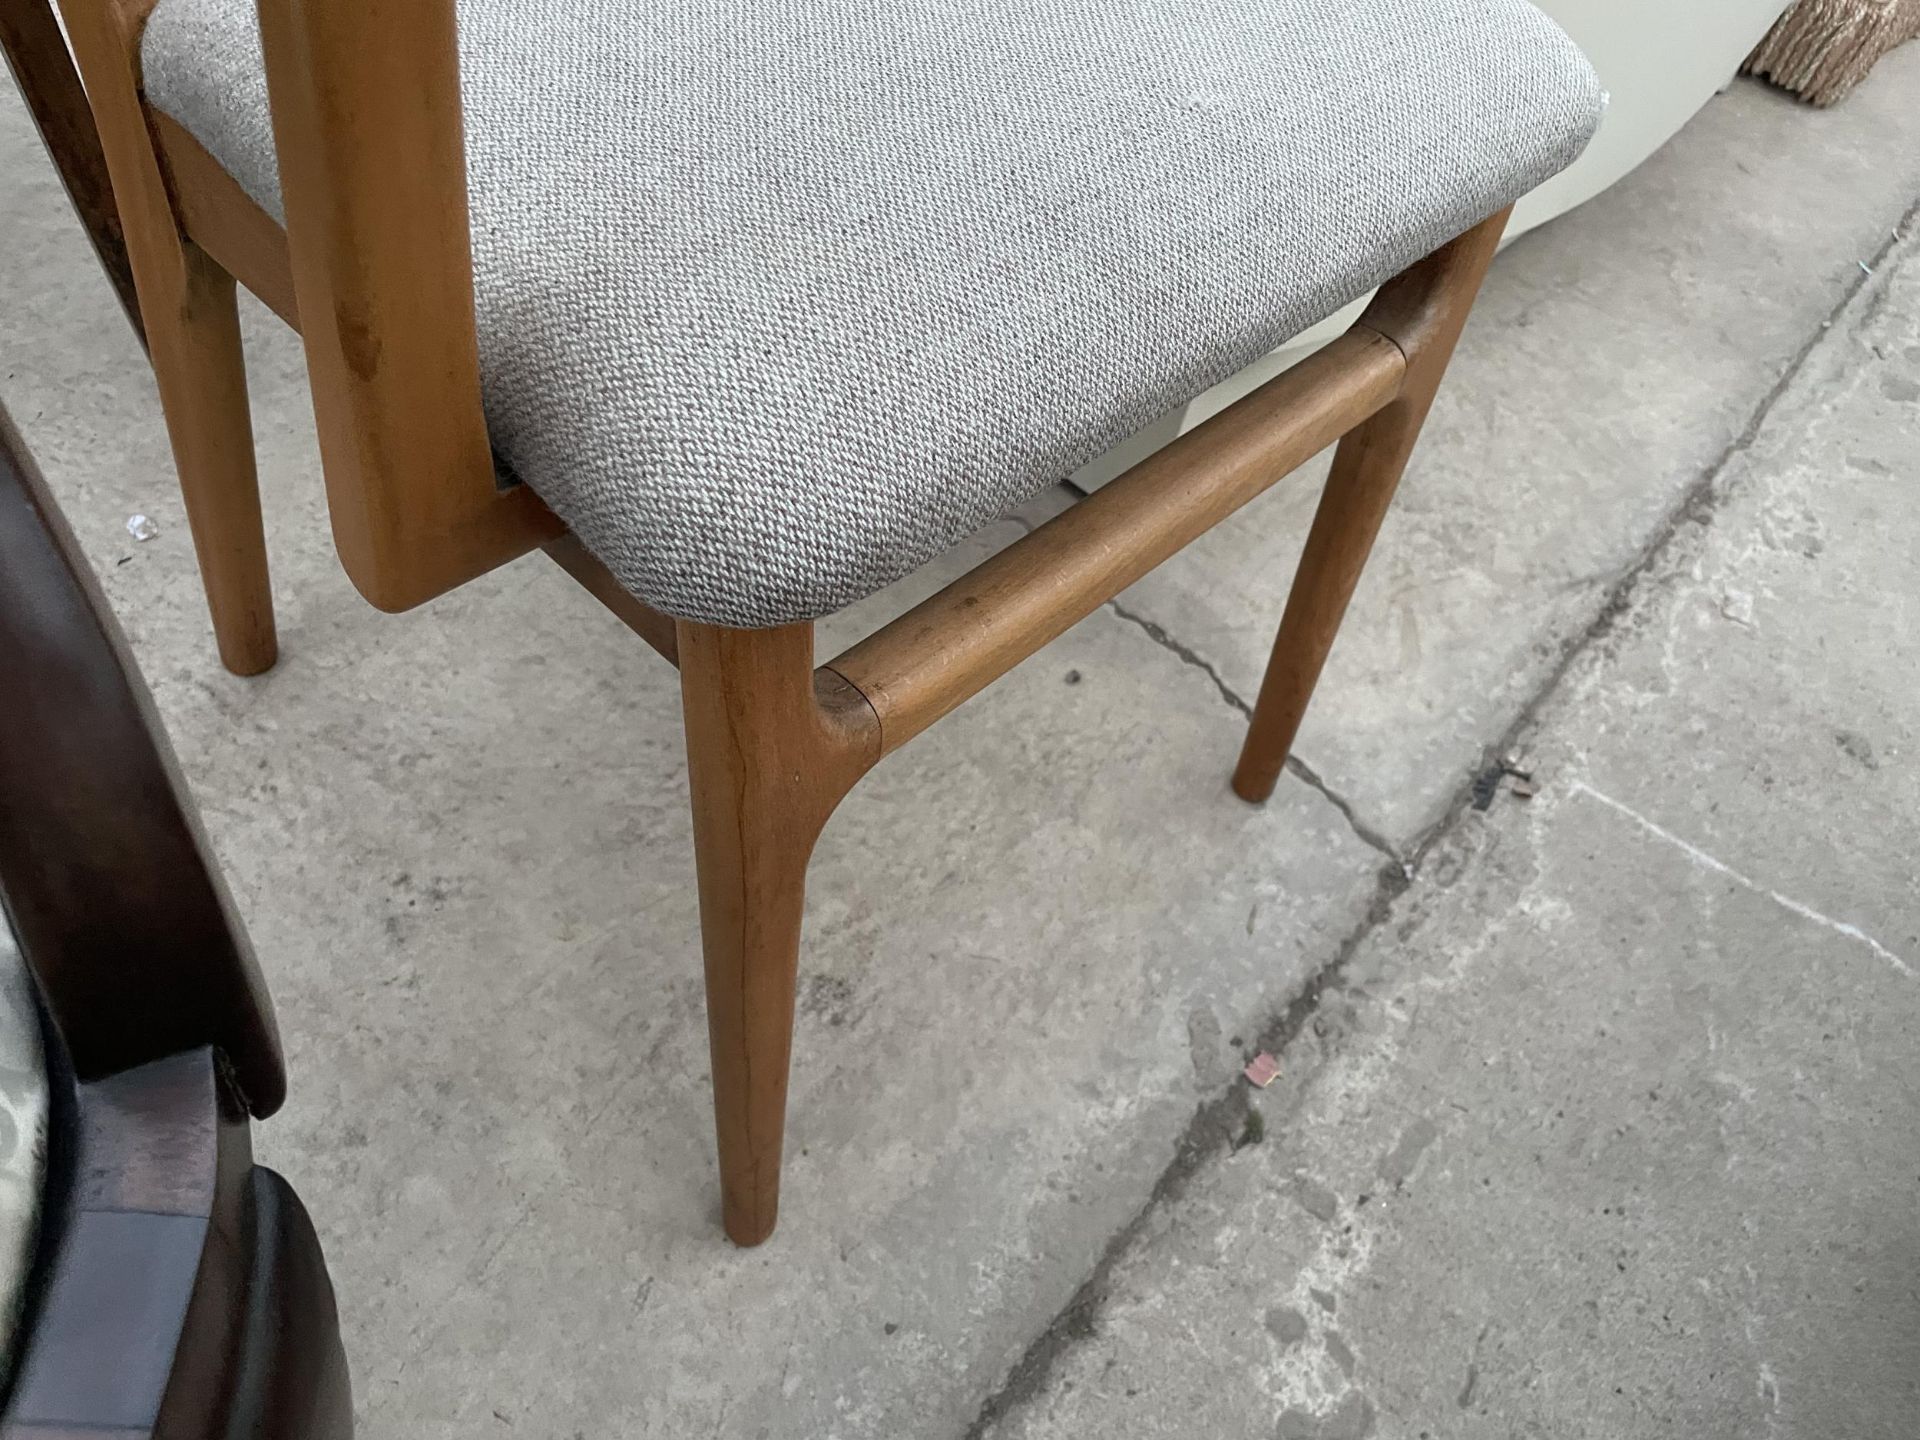 A RETRO BEECH ELBOW CHAIR STAMPED 'MAPLE' - Image 3 of 3